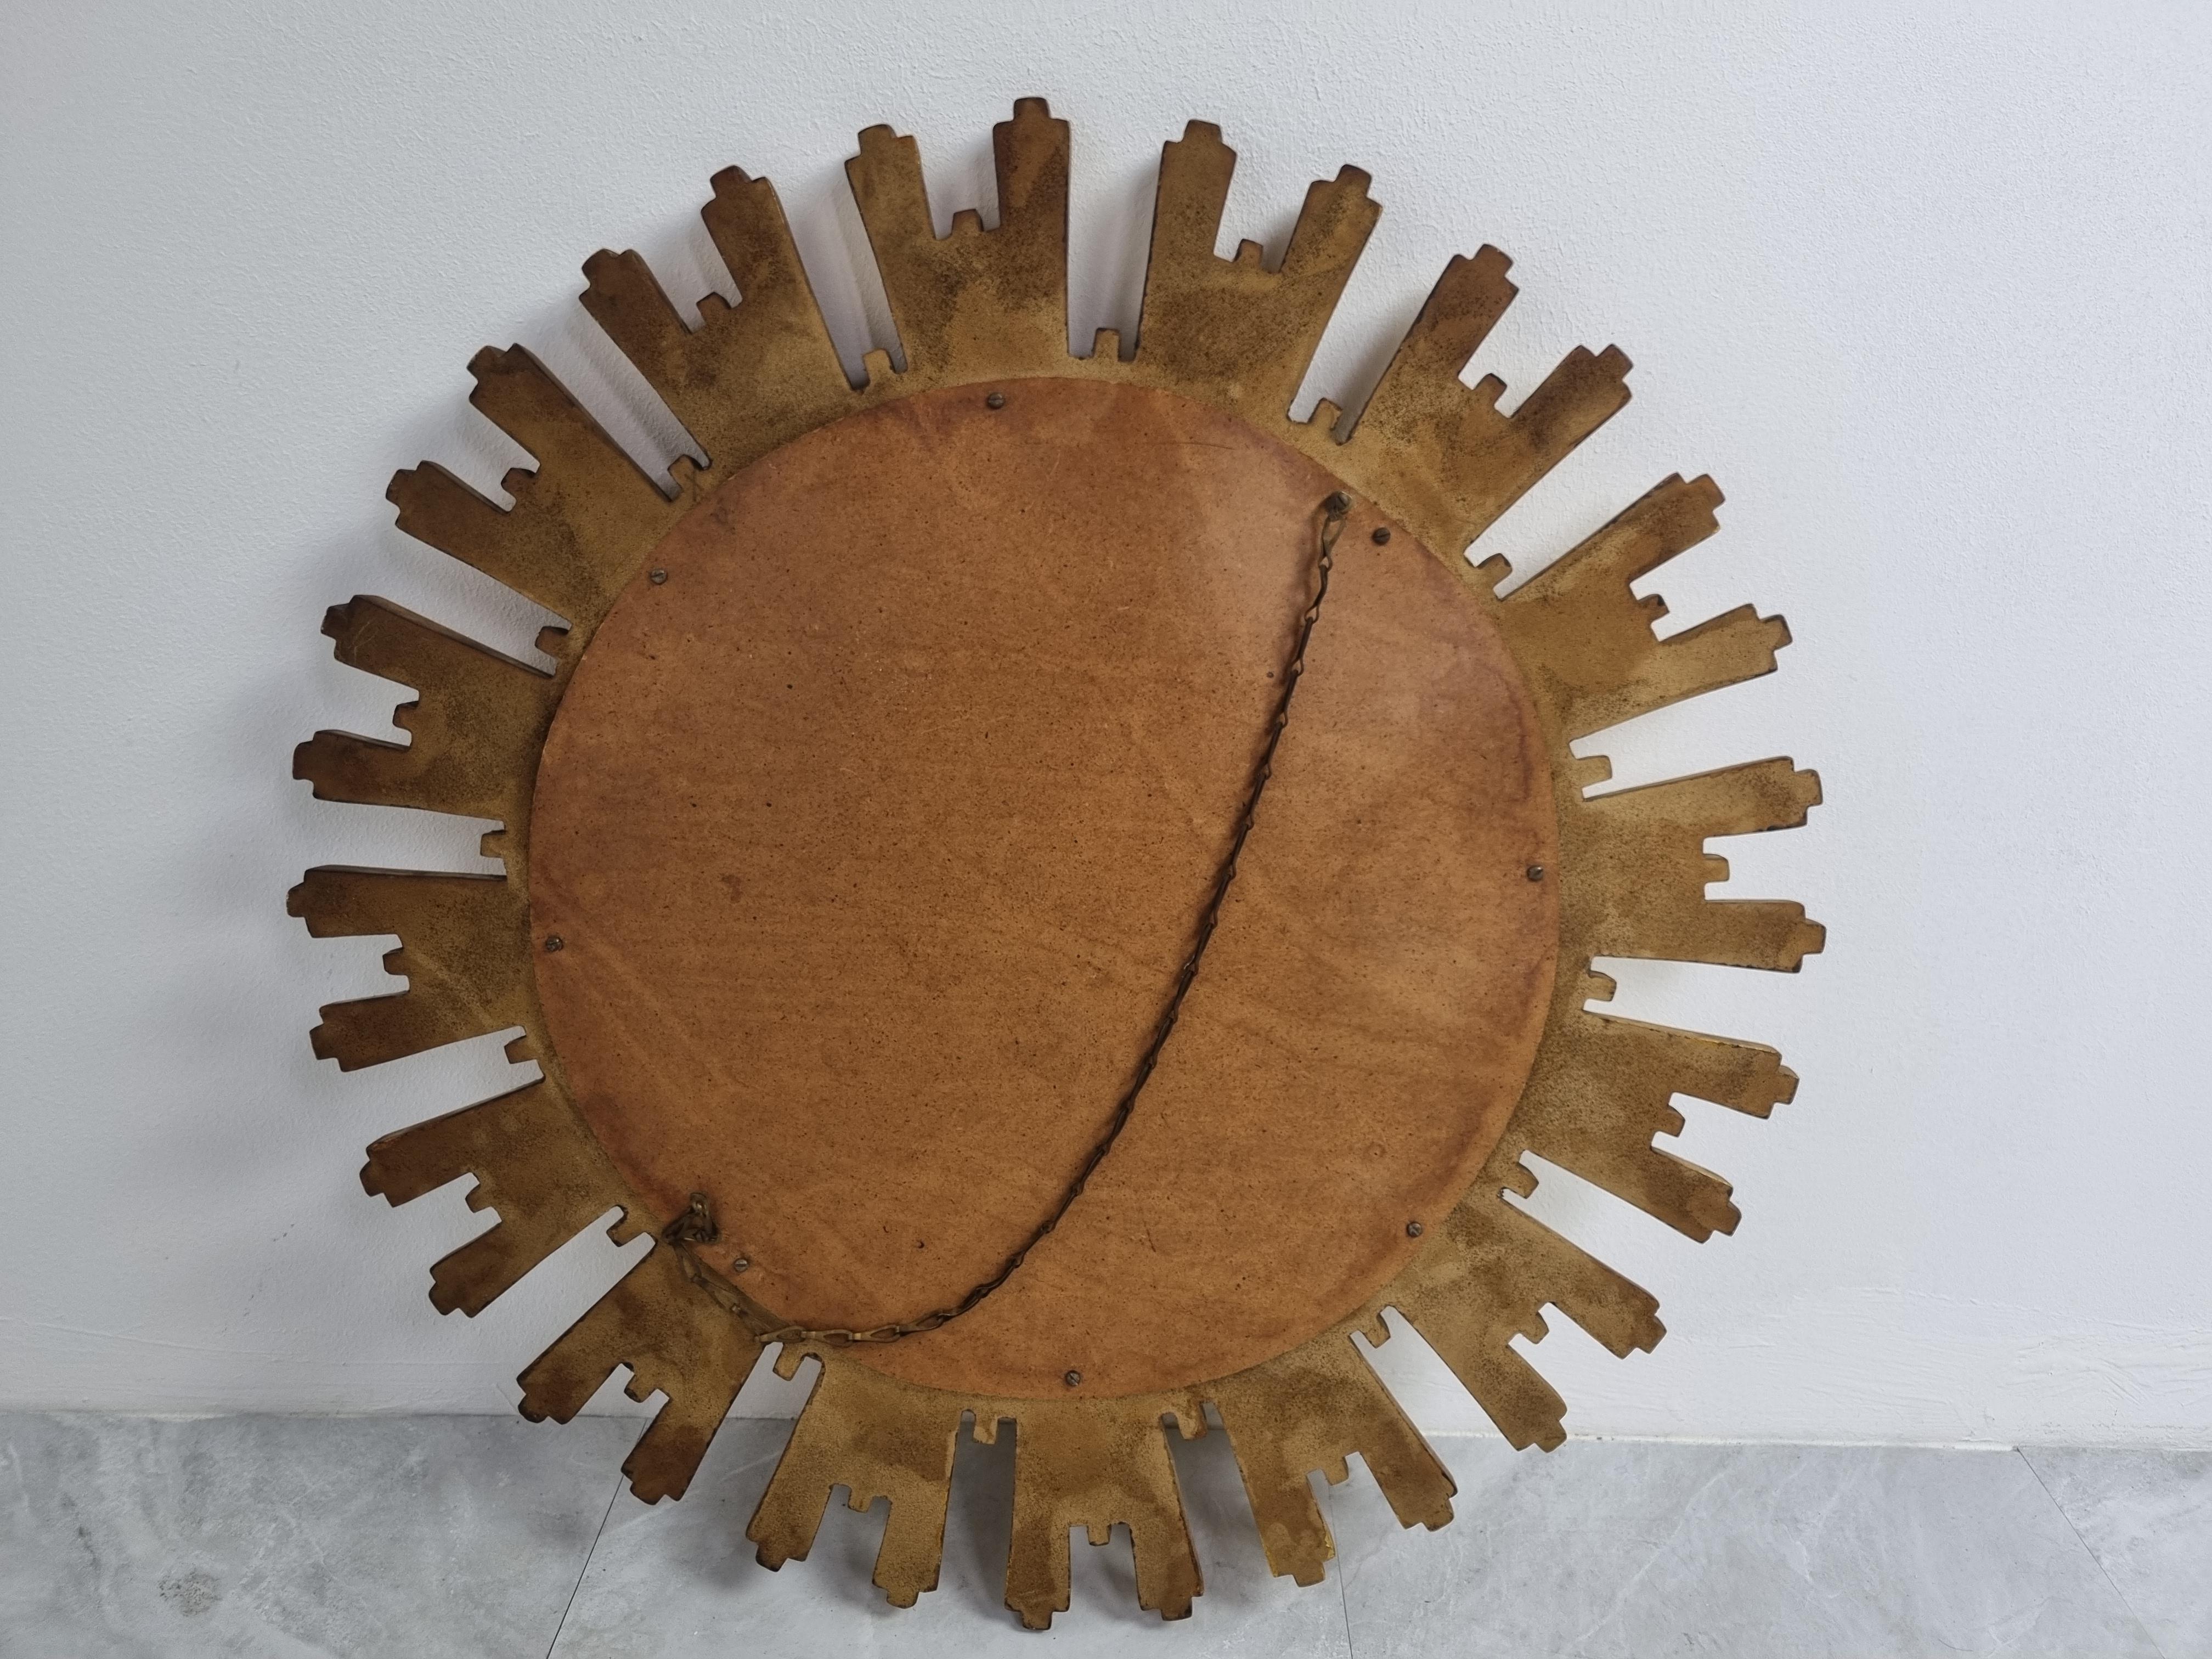 Heavy gilded resin sunburst mirror with convex mirror glass.

The golden mirror is in a good condition.

1960s - made in Belgium.

Dimensions:
Diameter: 55cm/ 21.6